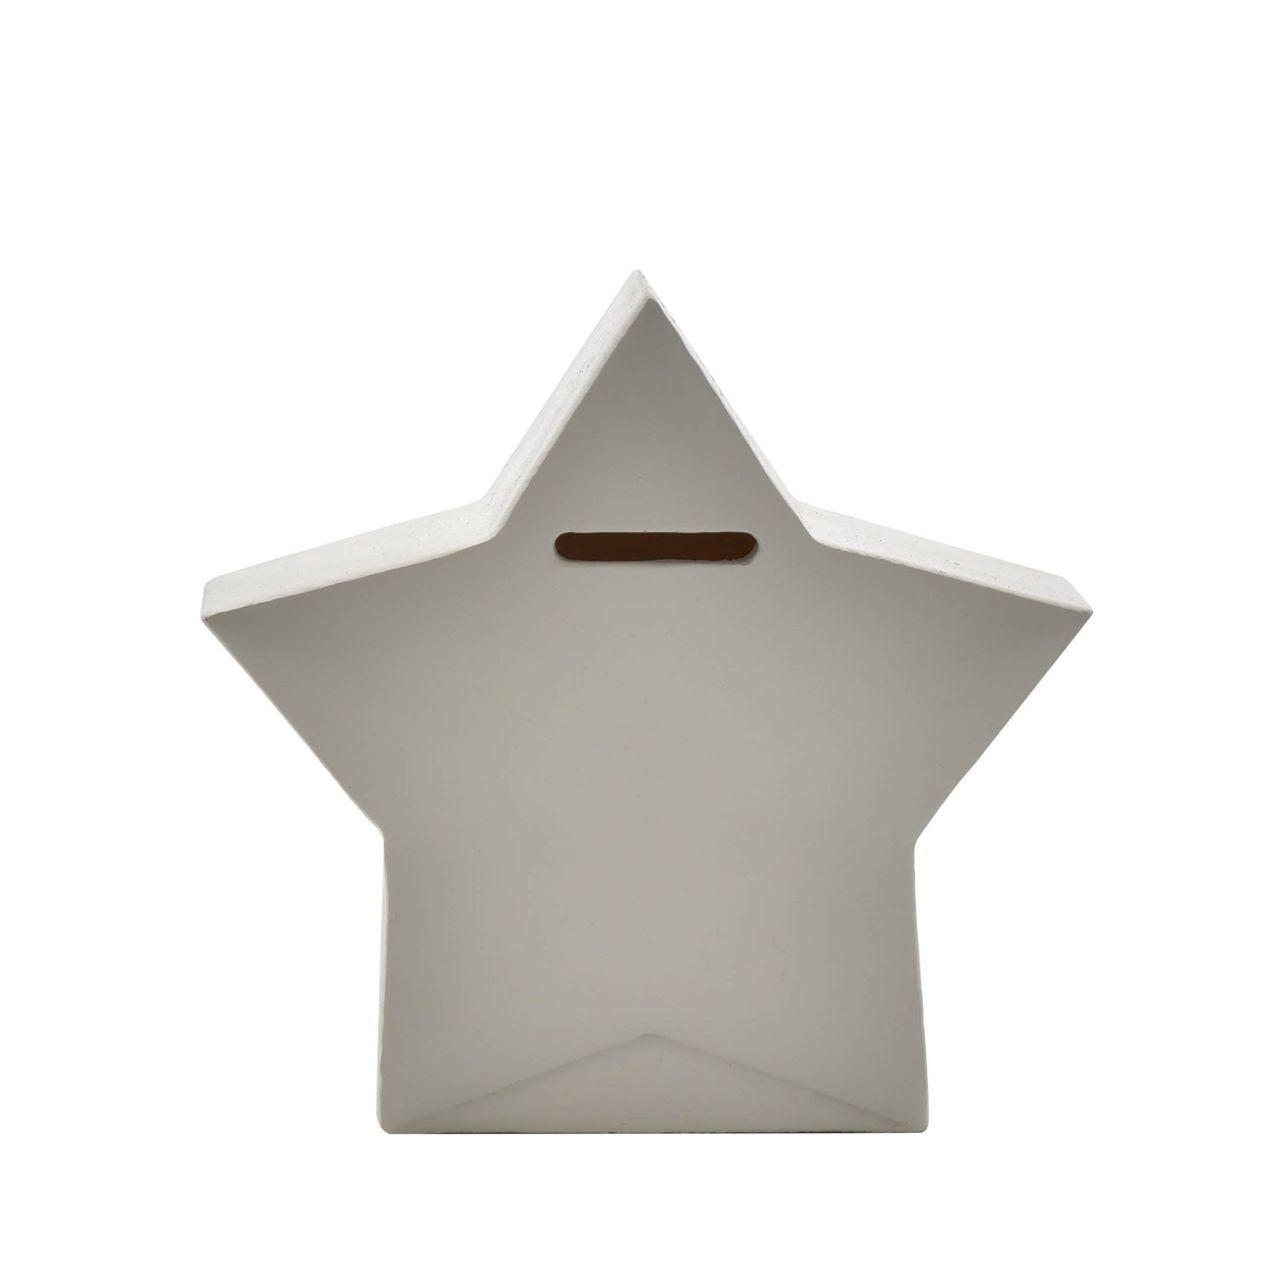 Star Shaped Resin Money Box "Twinkle Twinkle" 15 cm  A star shaped resin money box from BAMBINO BY JULIANA.  This wonderful keepsake provides glistening decoration for the nursery of new family arrivals which will be cherished eternally.